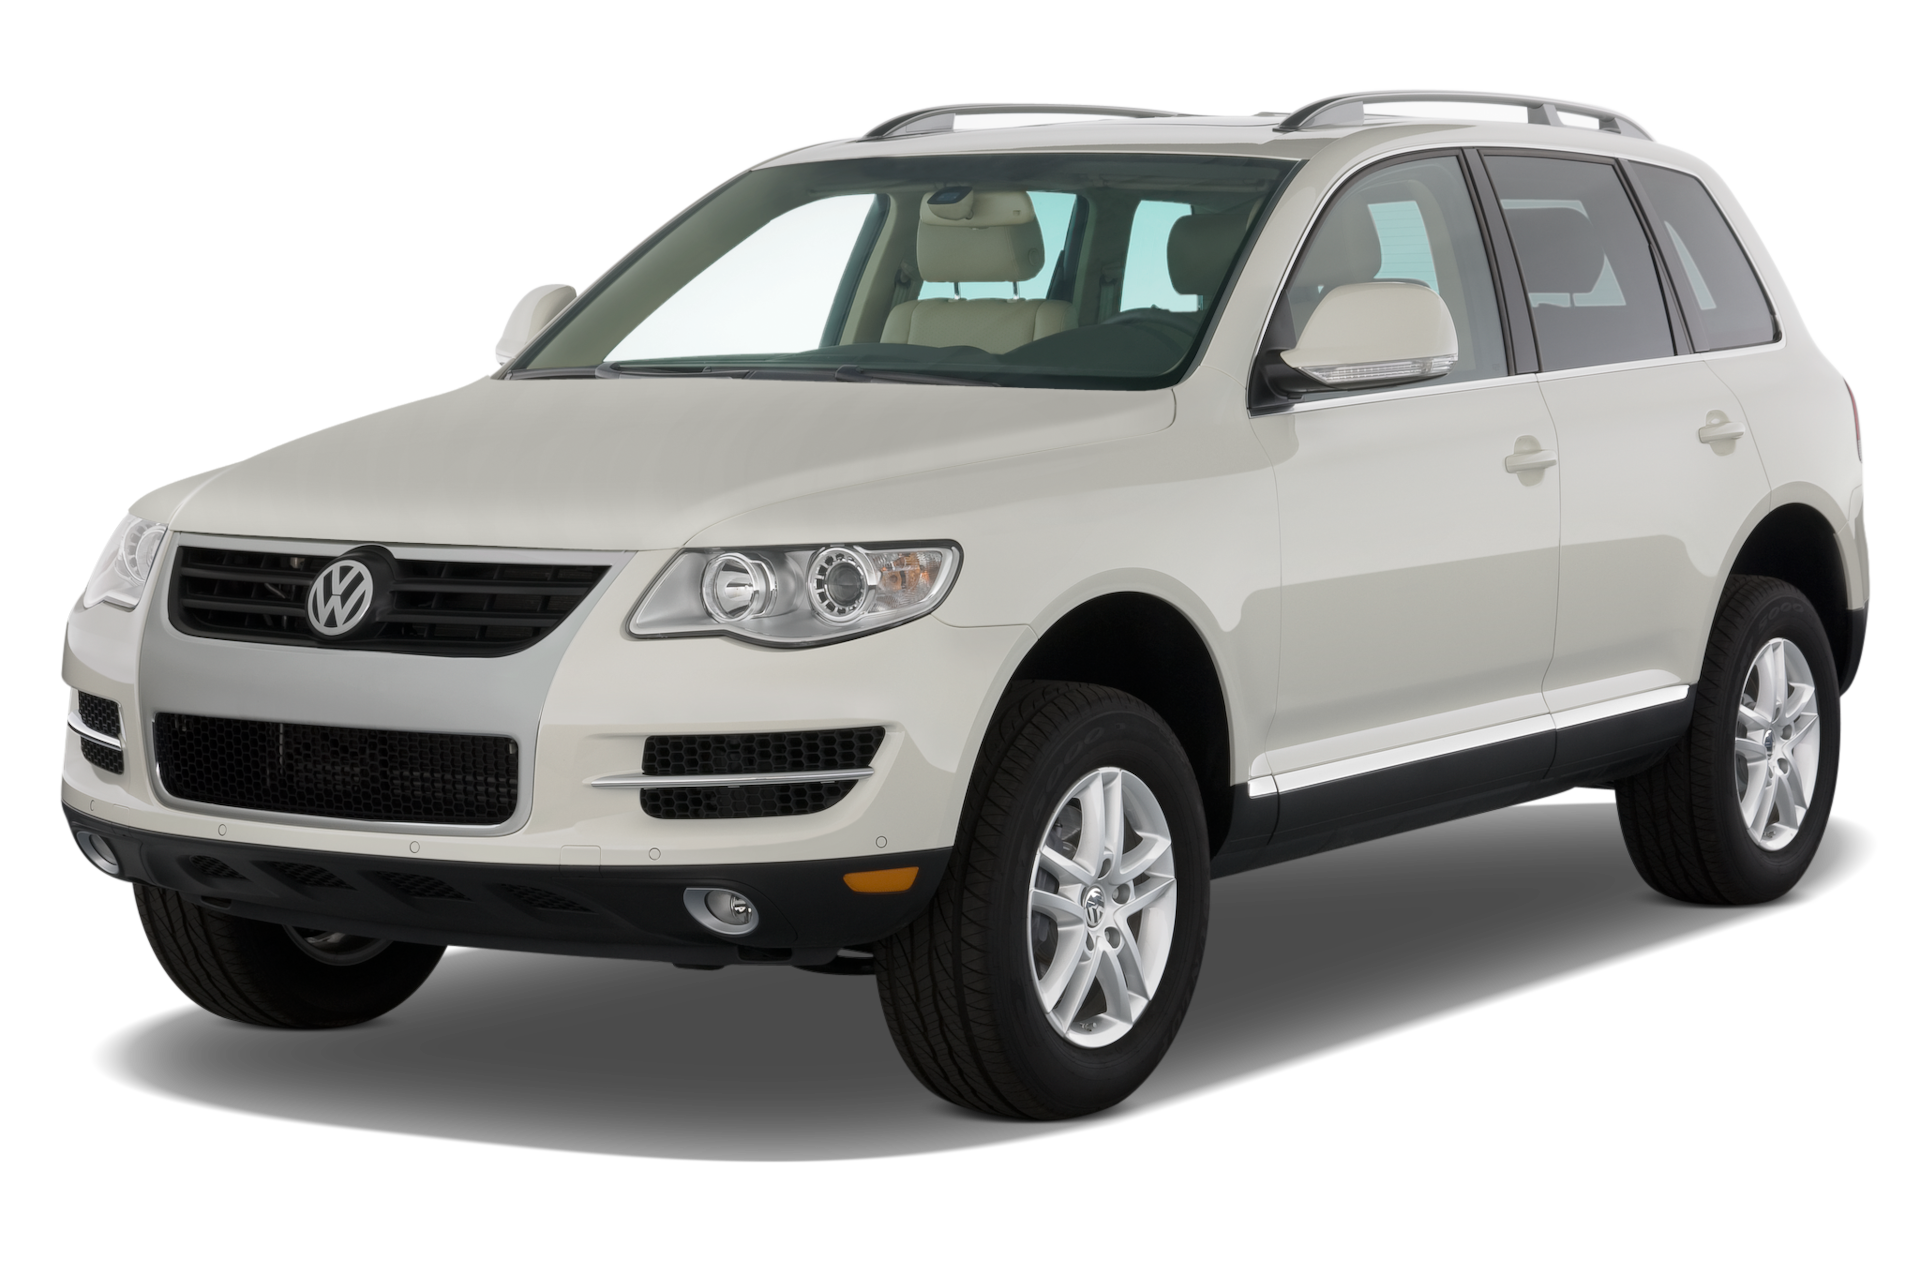 2010 Volkswagen Touareg 2 Prices, Reviews, and Photos - MotorTrend